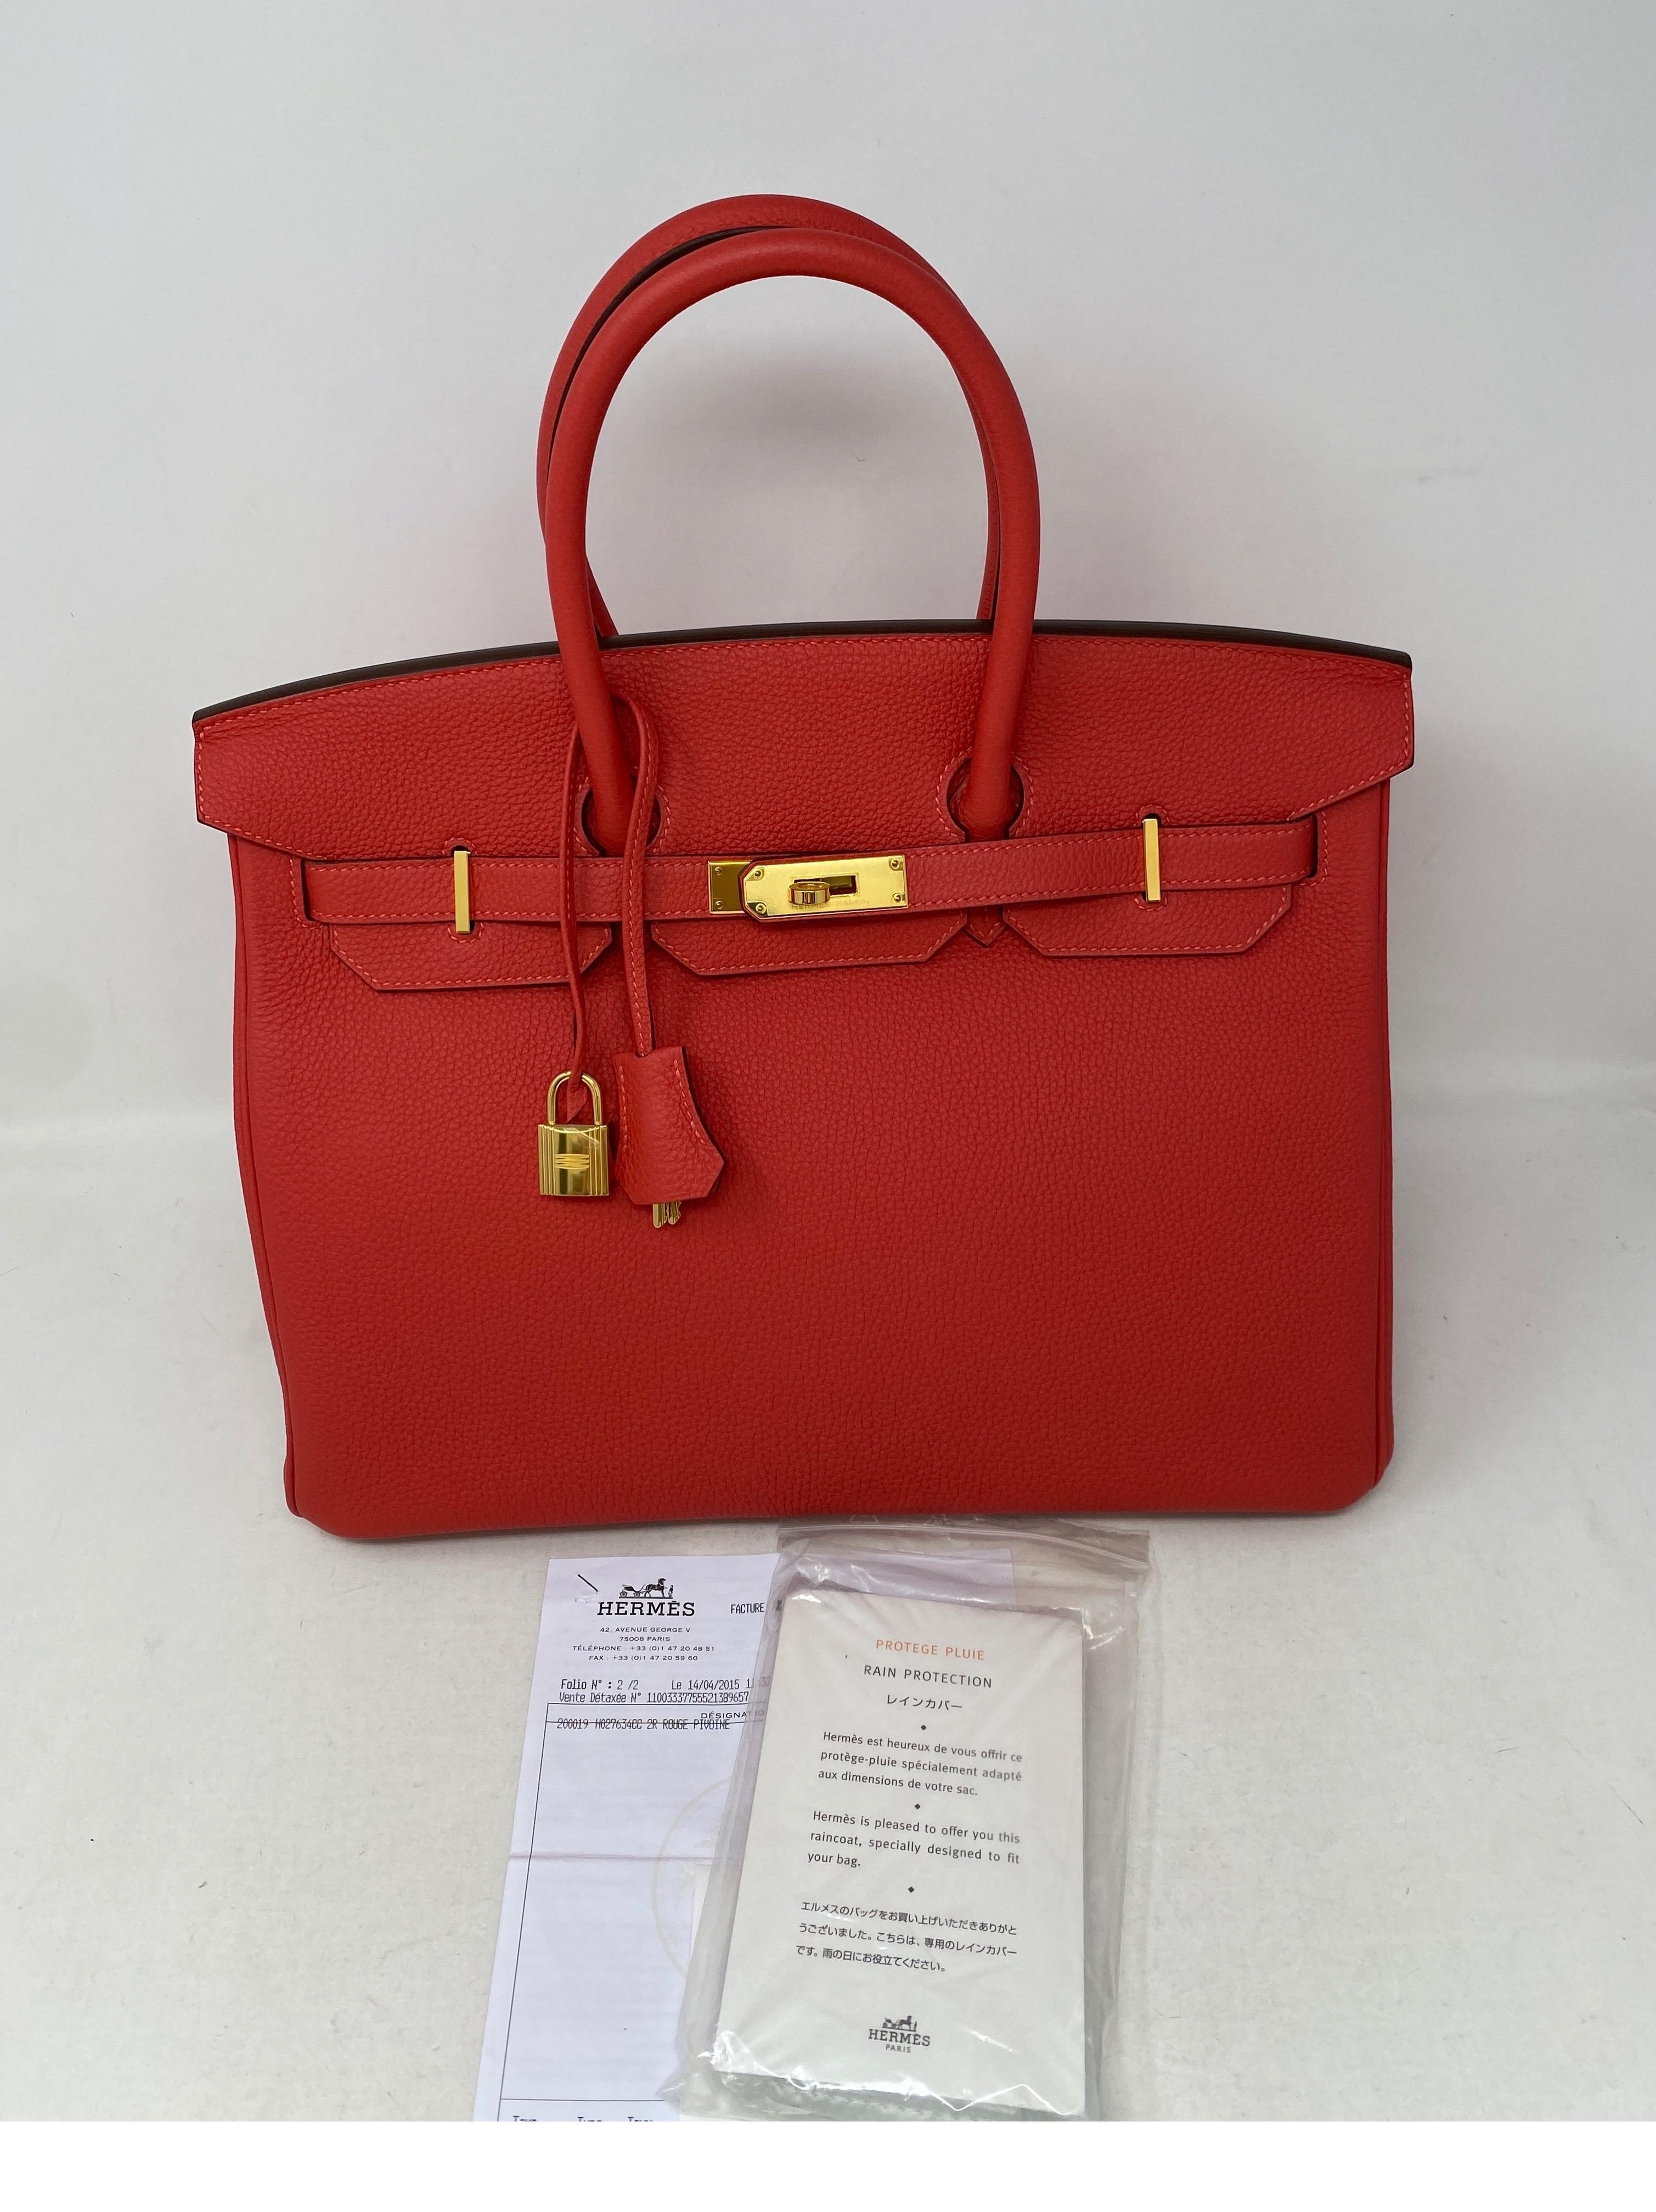 Hermes Birkin 35 Rouge Pivoine Bag. Beautiful rose pink/ red color. Peony in French. Excellent condition like new. Gold hardware. R stamp. From 2014. Was never used. Plastic is still on hardware. Don't miss out on this one. Stunning combination.